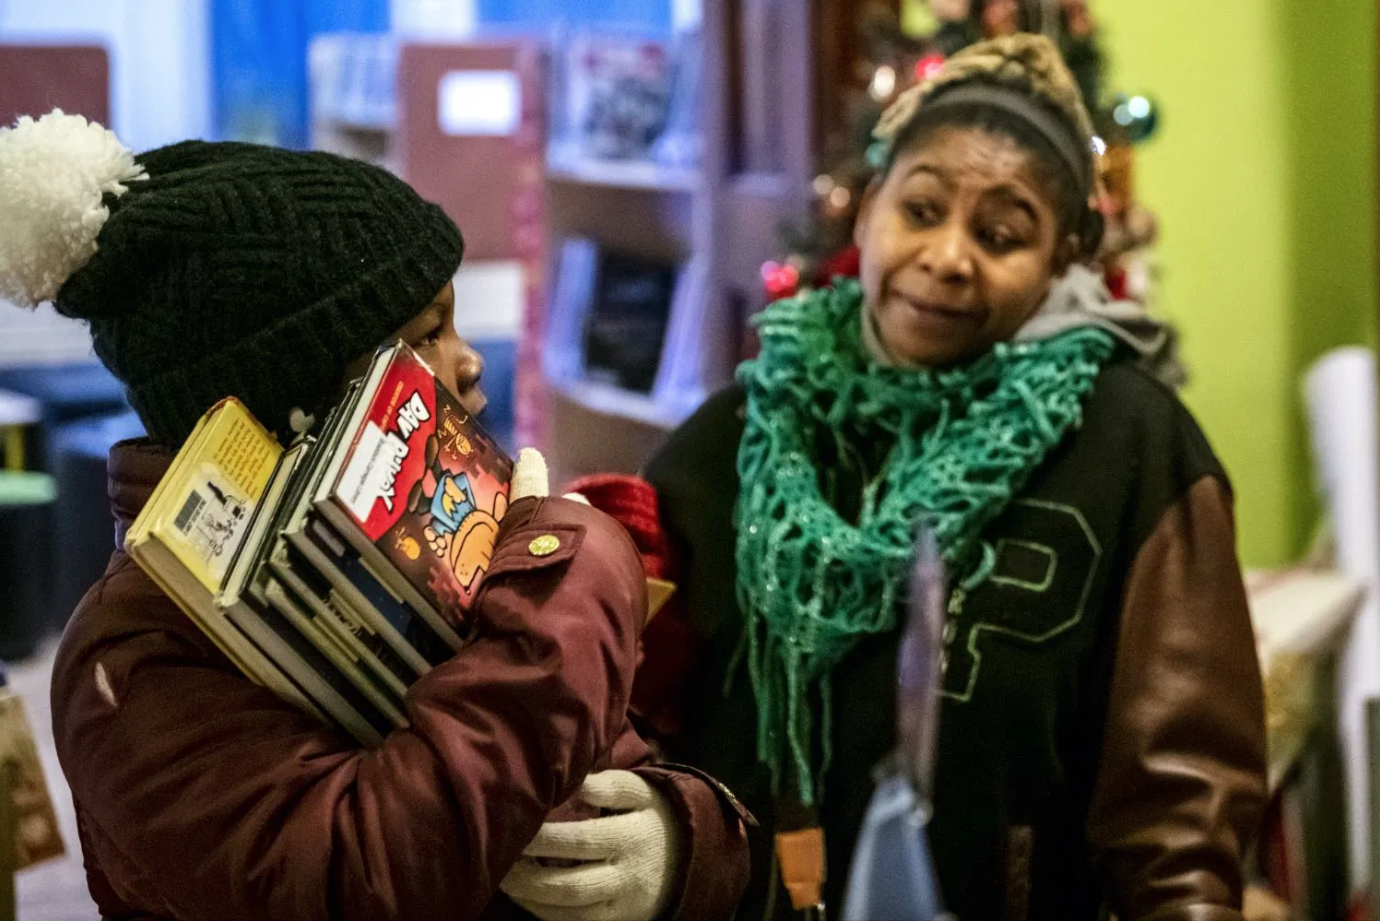 Kee’Miyah holds a stack of books that she plans on checking out to read over the weekend as Glaze speaks to her about making sure she does her chores before reading. Image by Michael M. Santiago/Post-Gazette. United States, 2019.